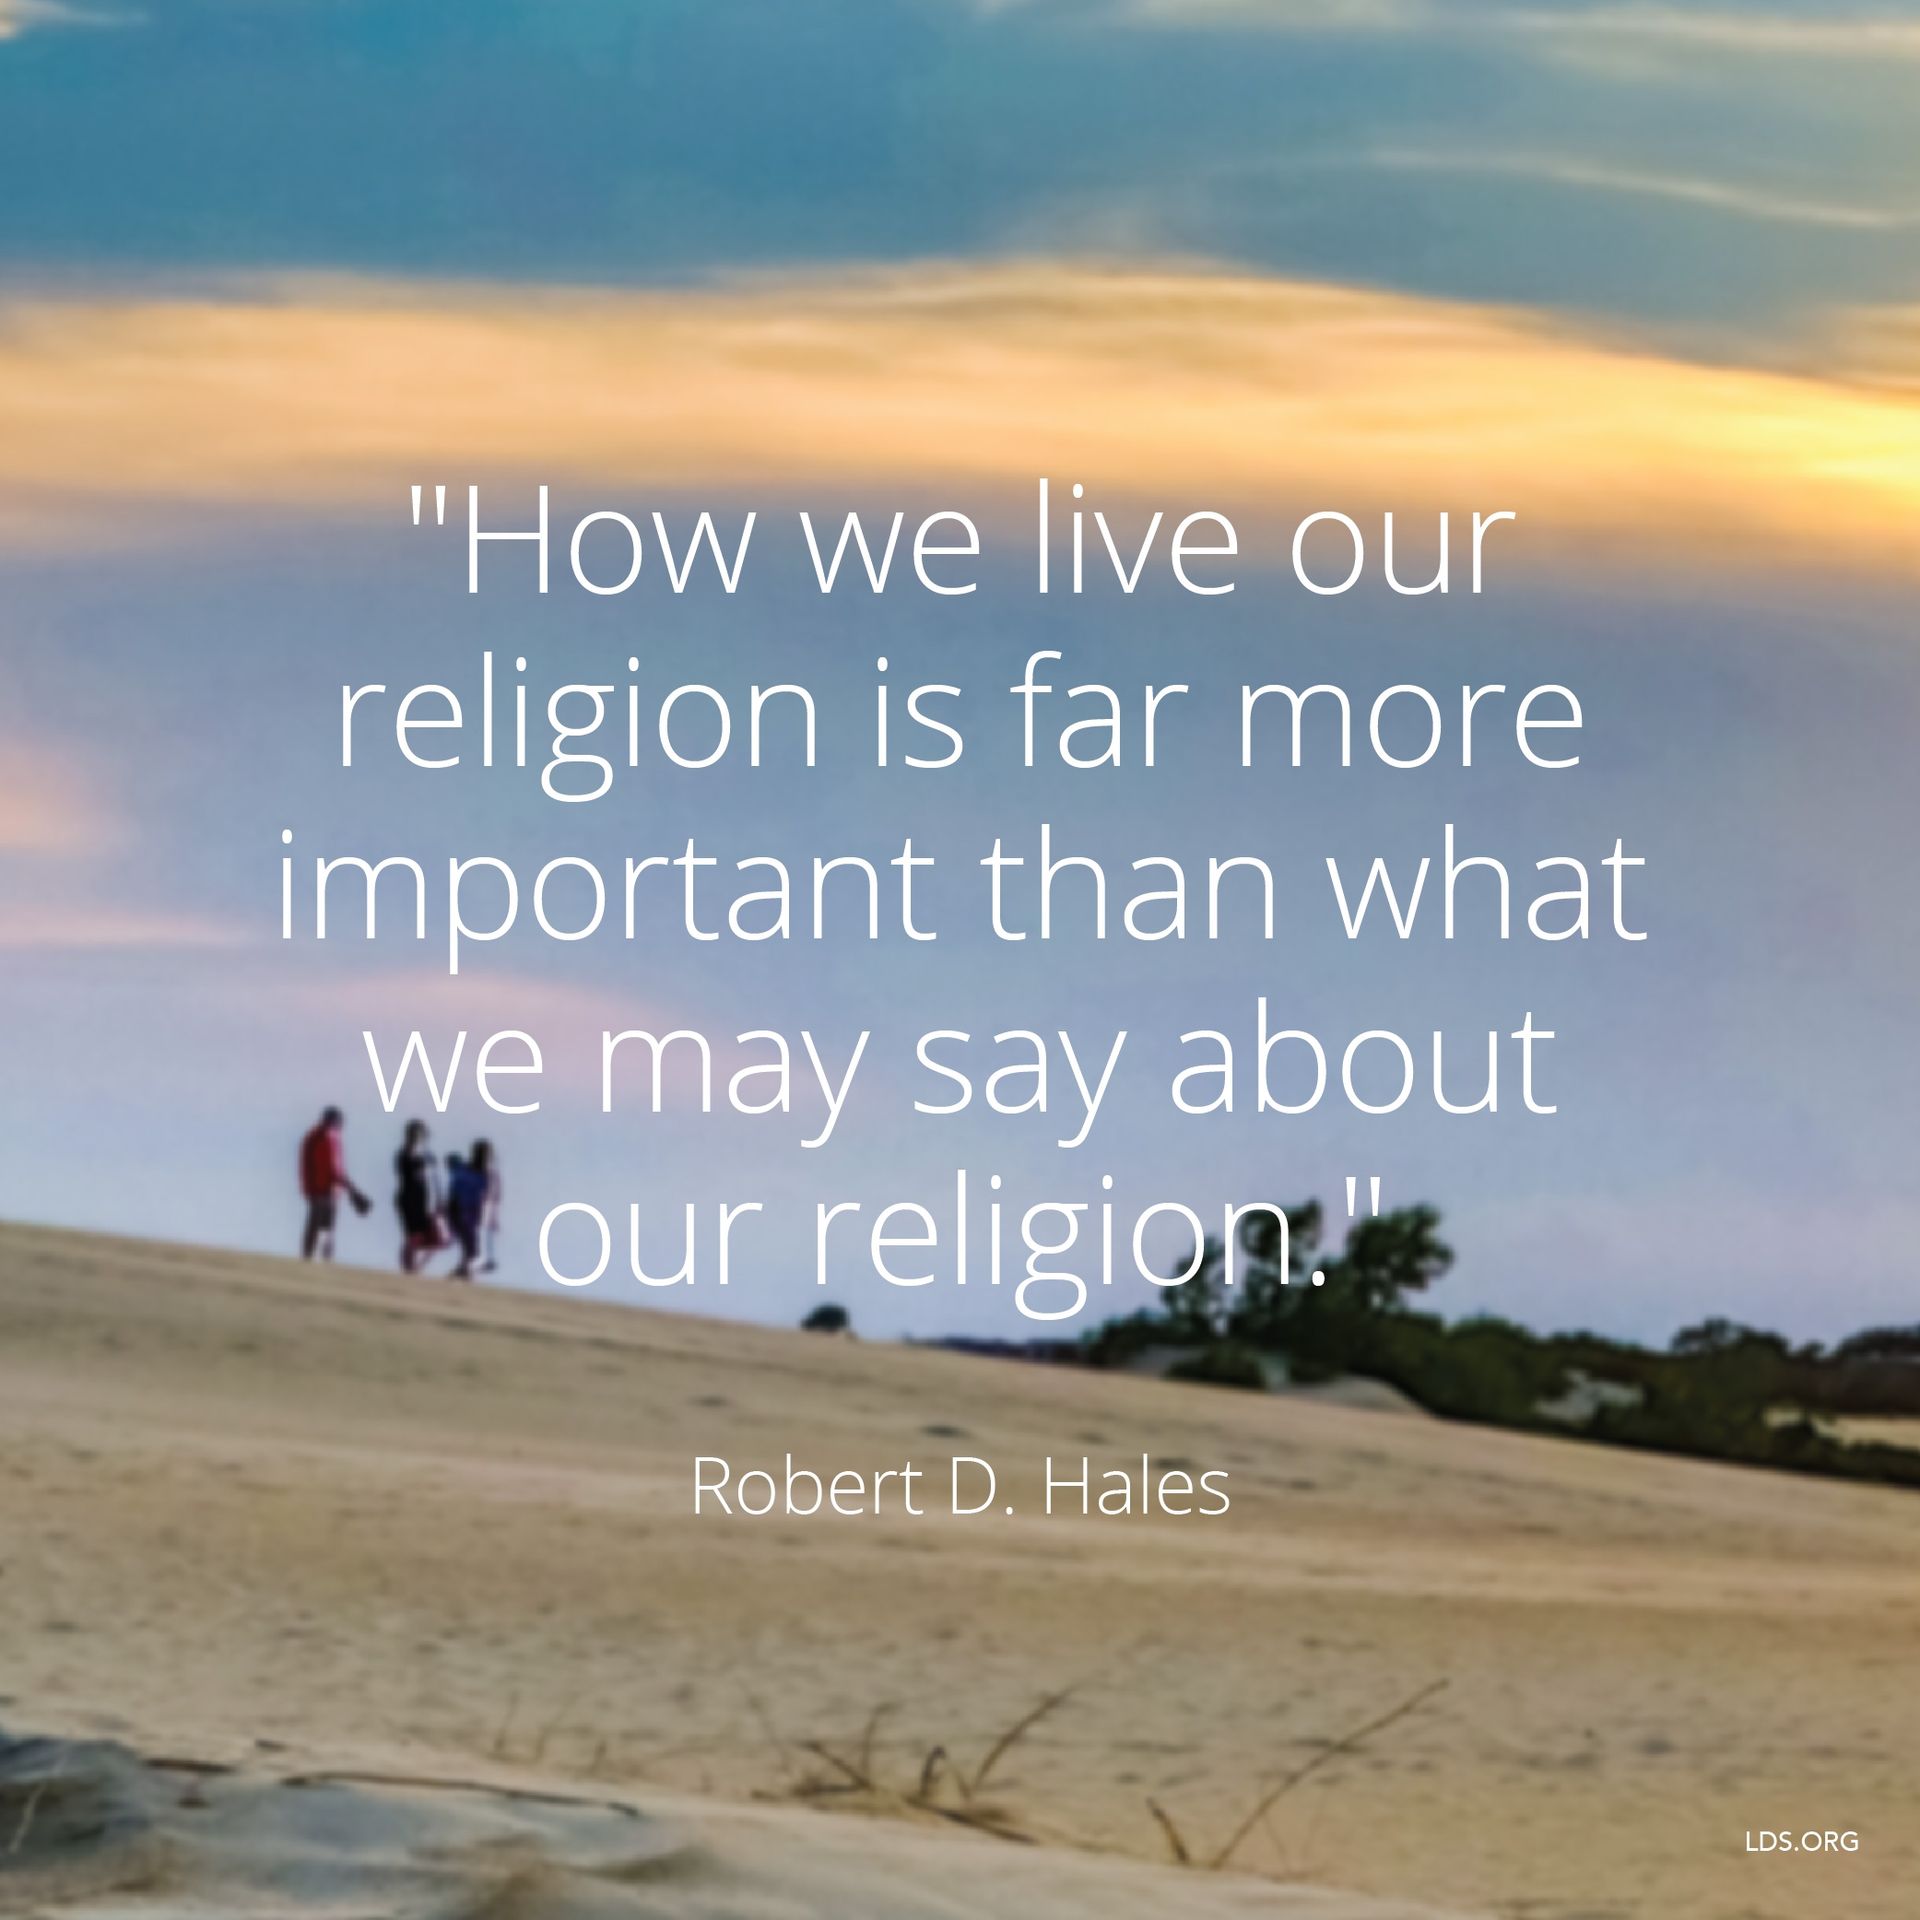 “How we live our religion is far more important than what we may say about our religion.”—Elder Robert D. Hales, “Preserving Agency, Protecting Religious Freedom” © undefined ipCode 1.